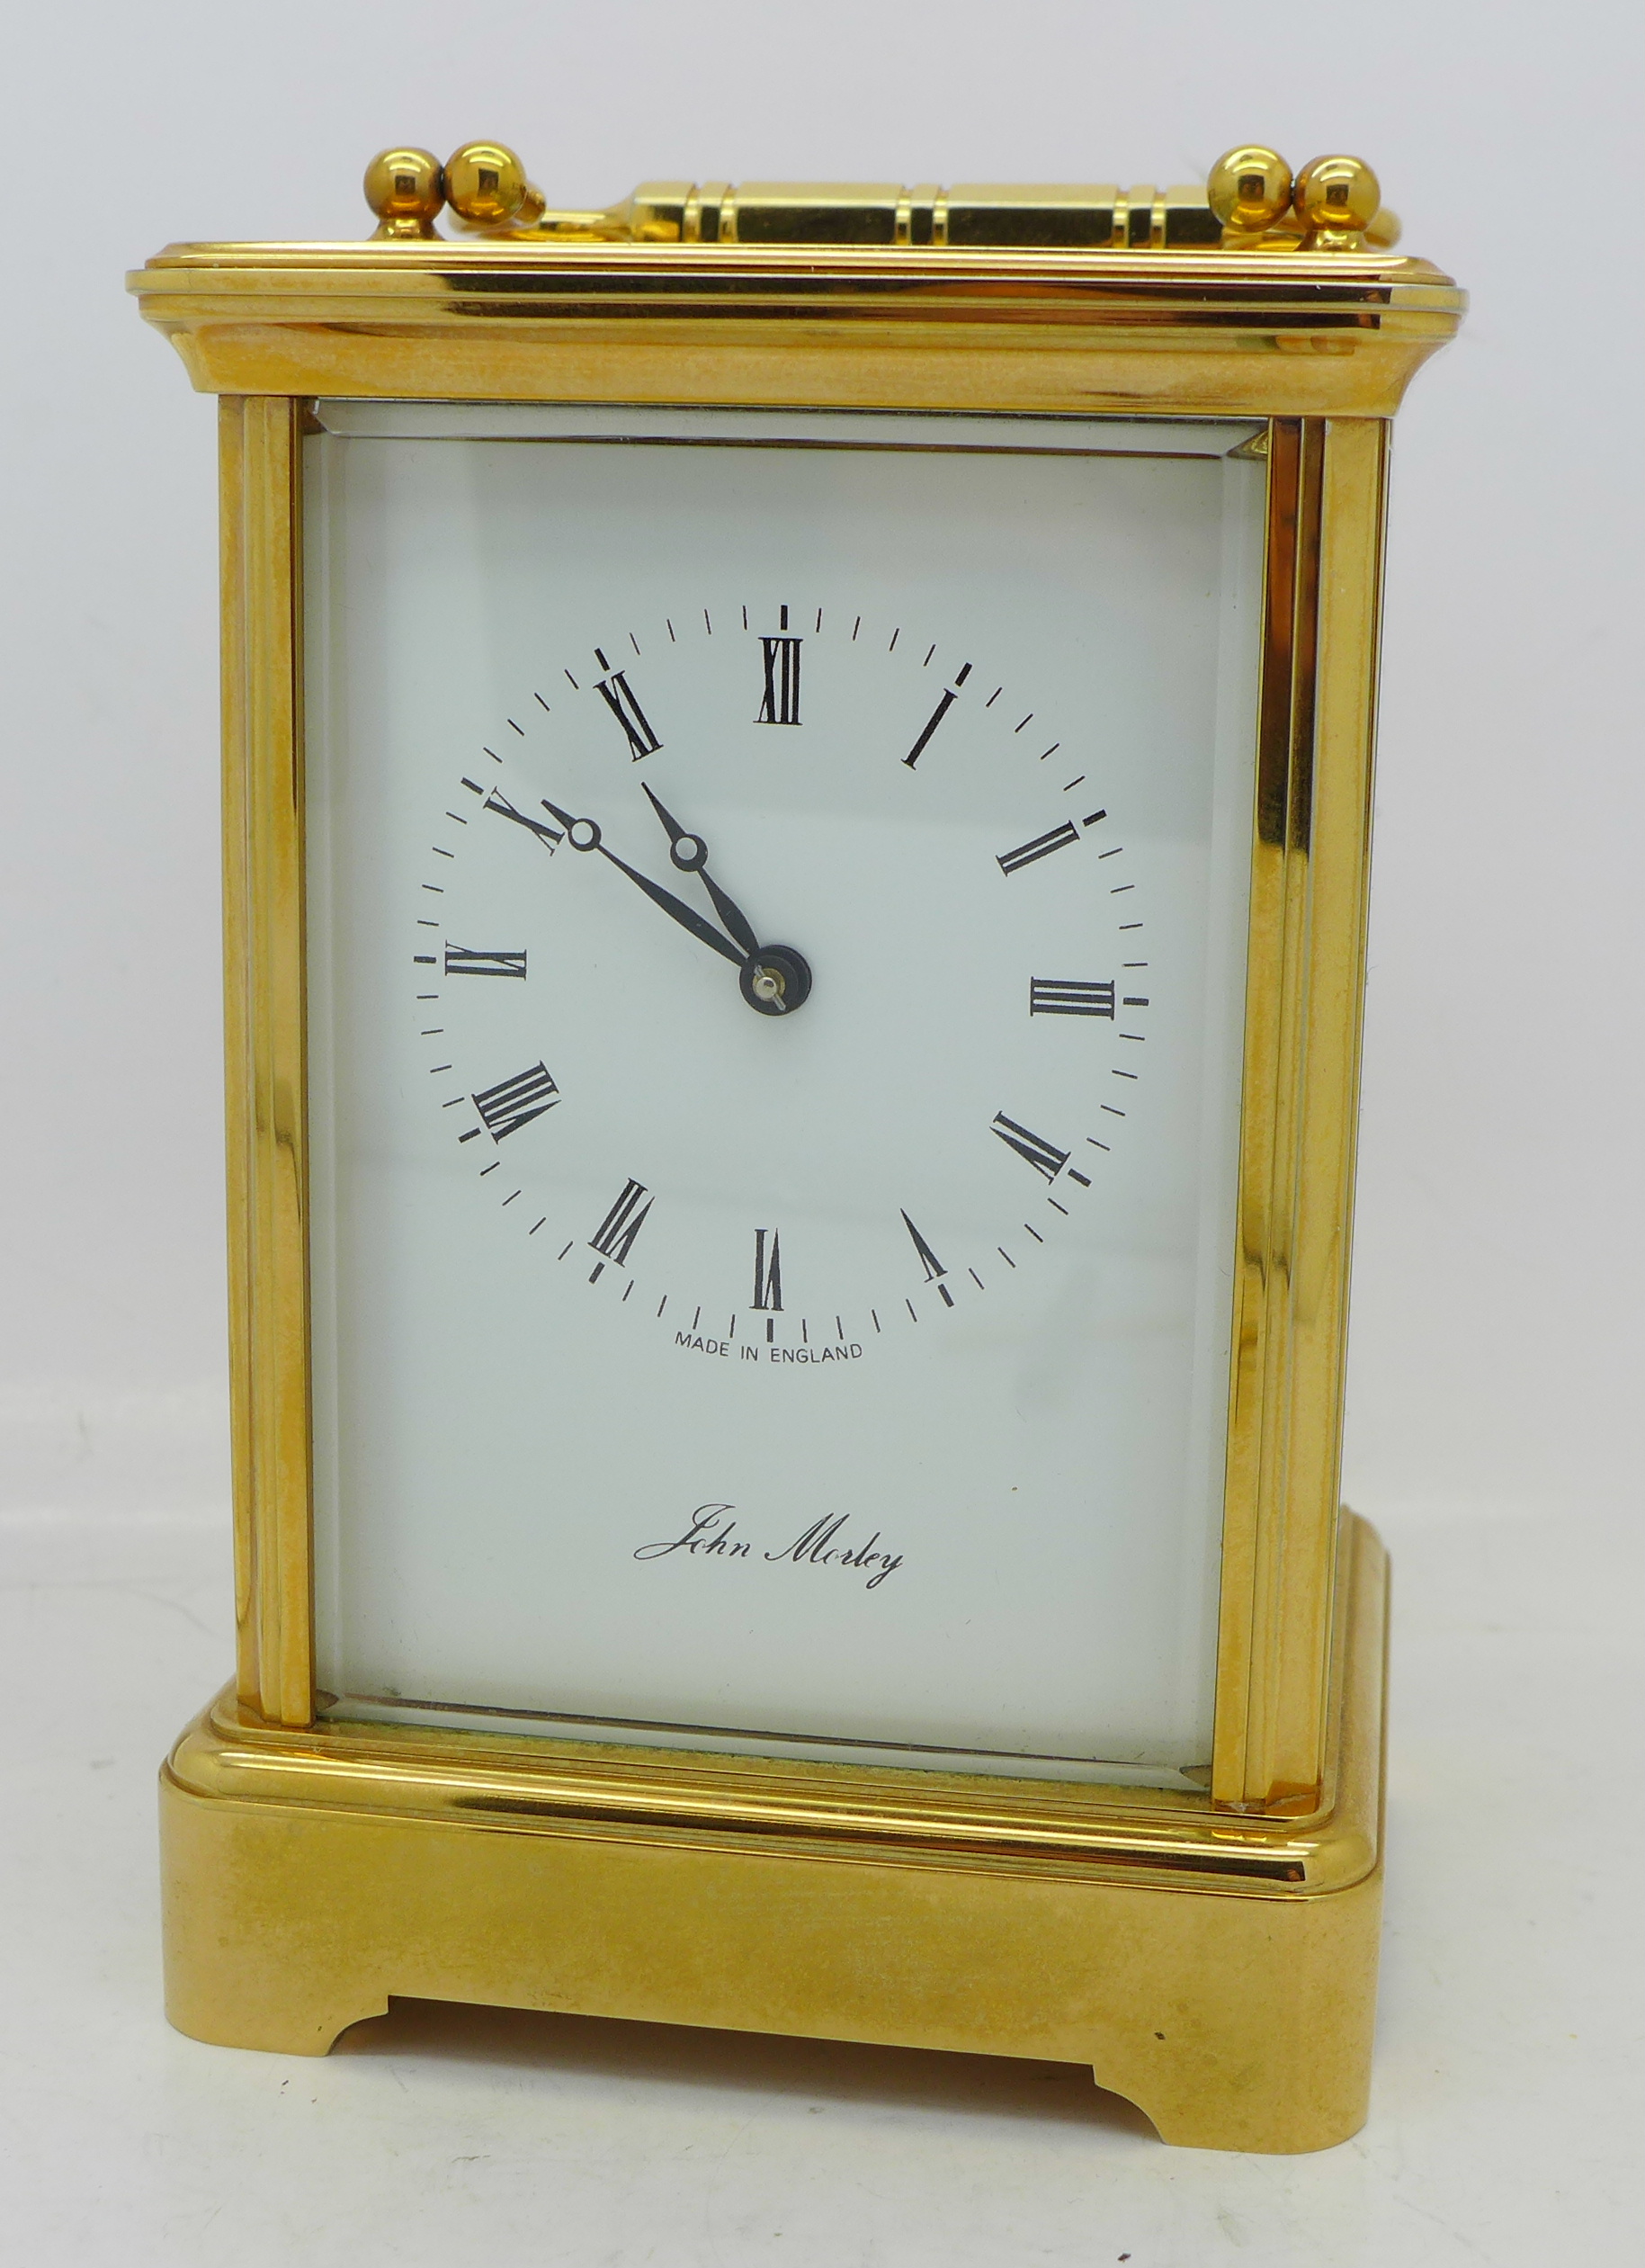 A carriage clock, with strike movement, John Morley, made in England, with box, height 13.